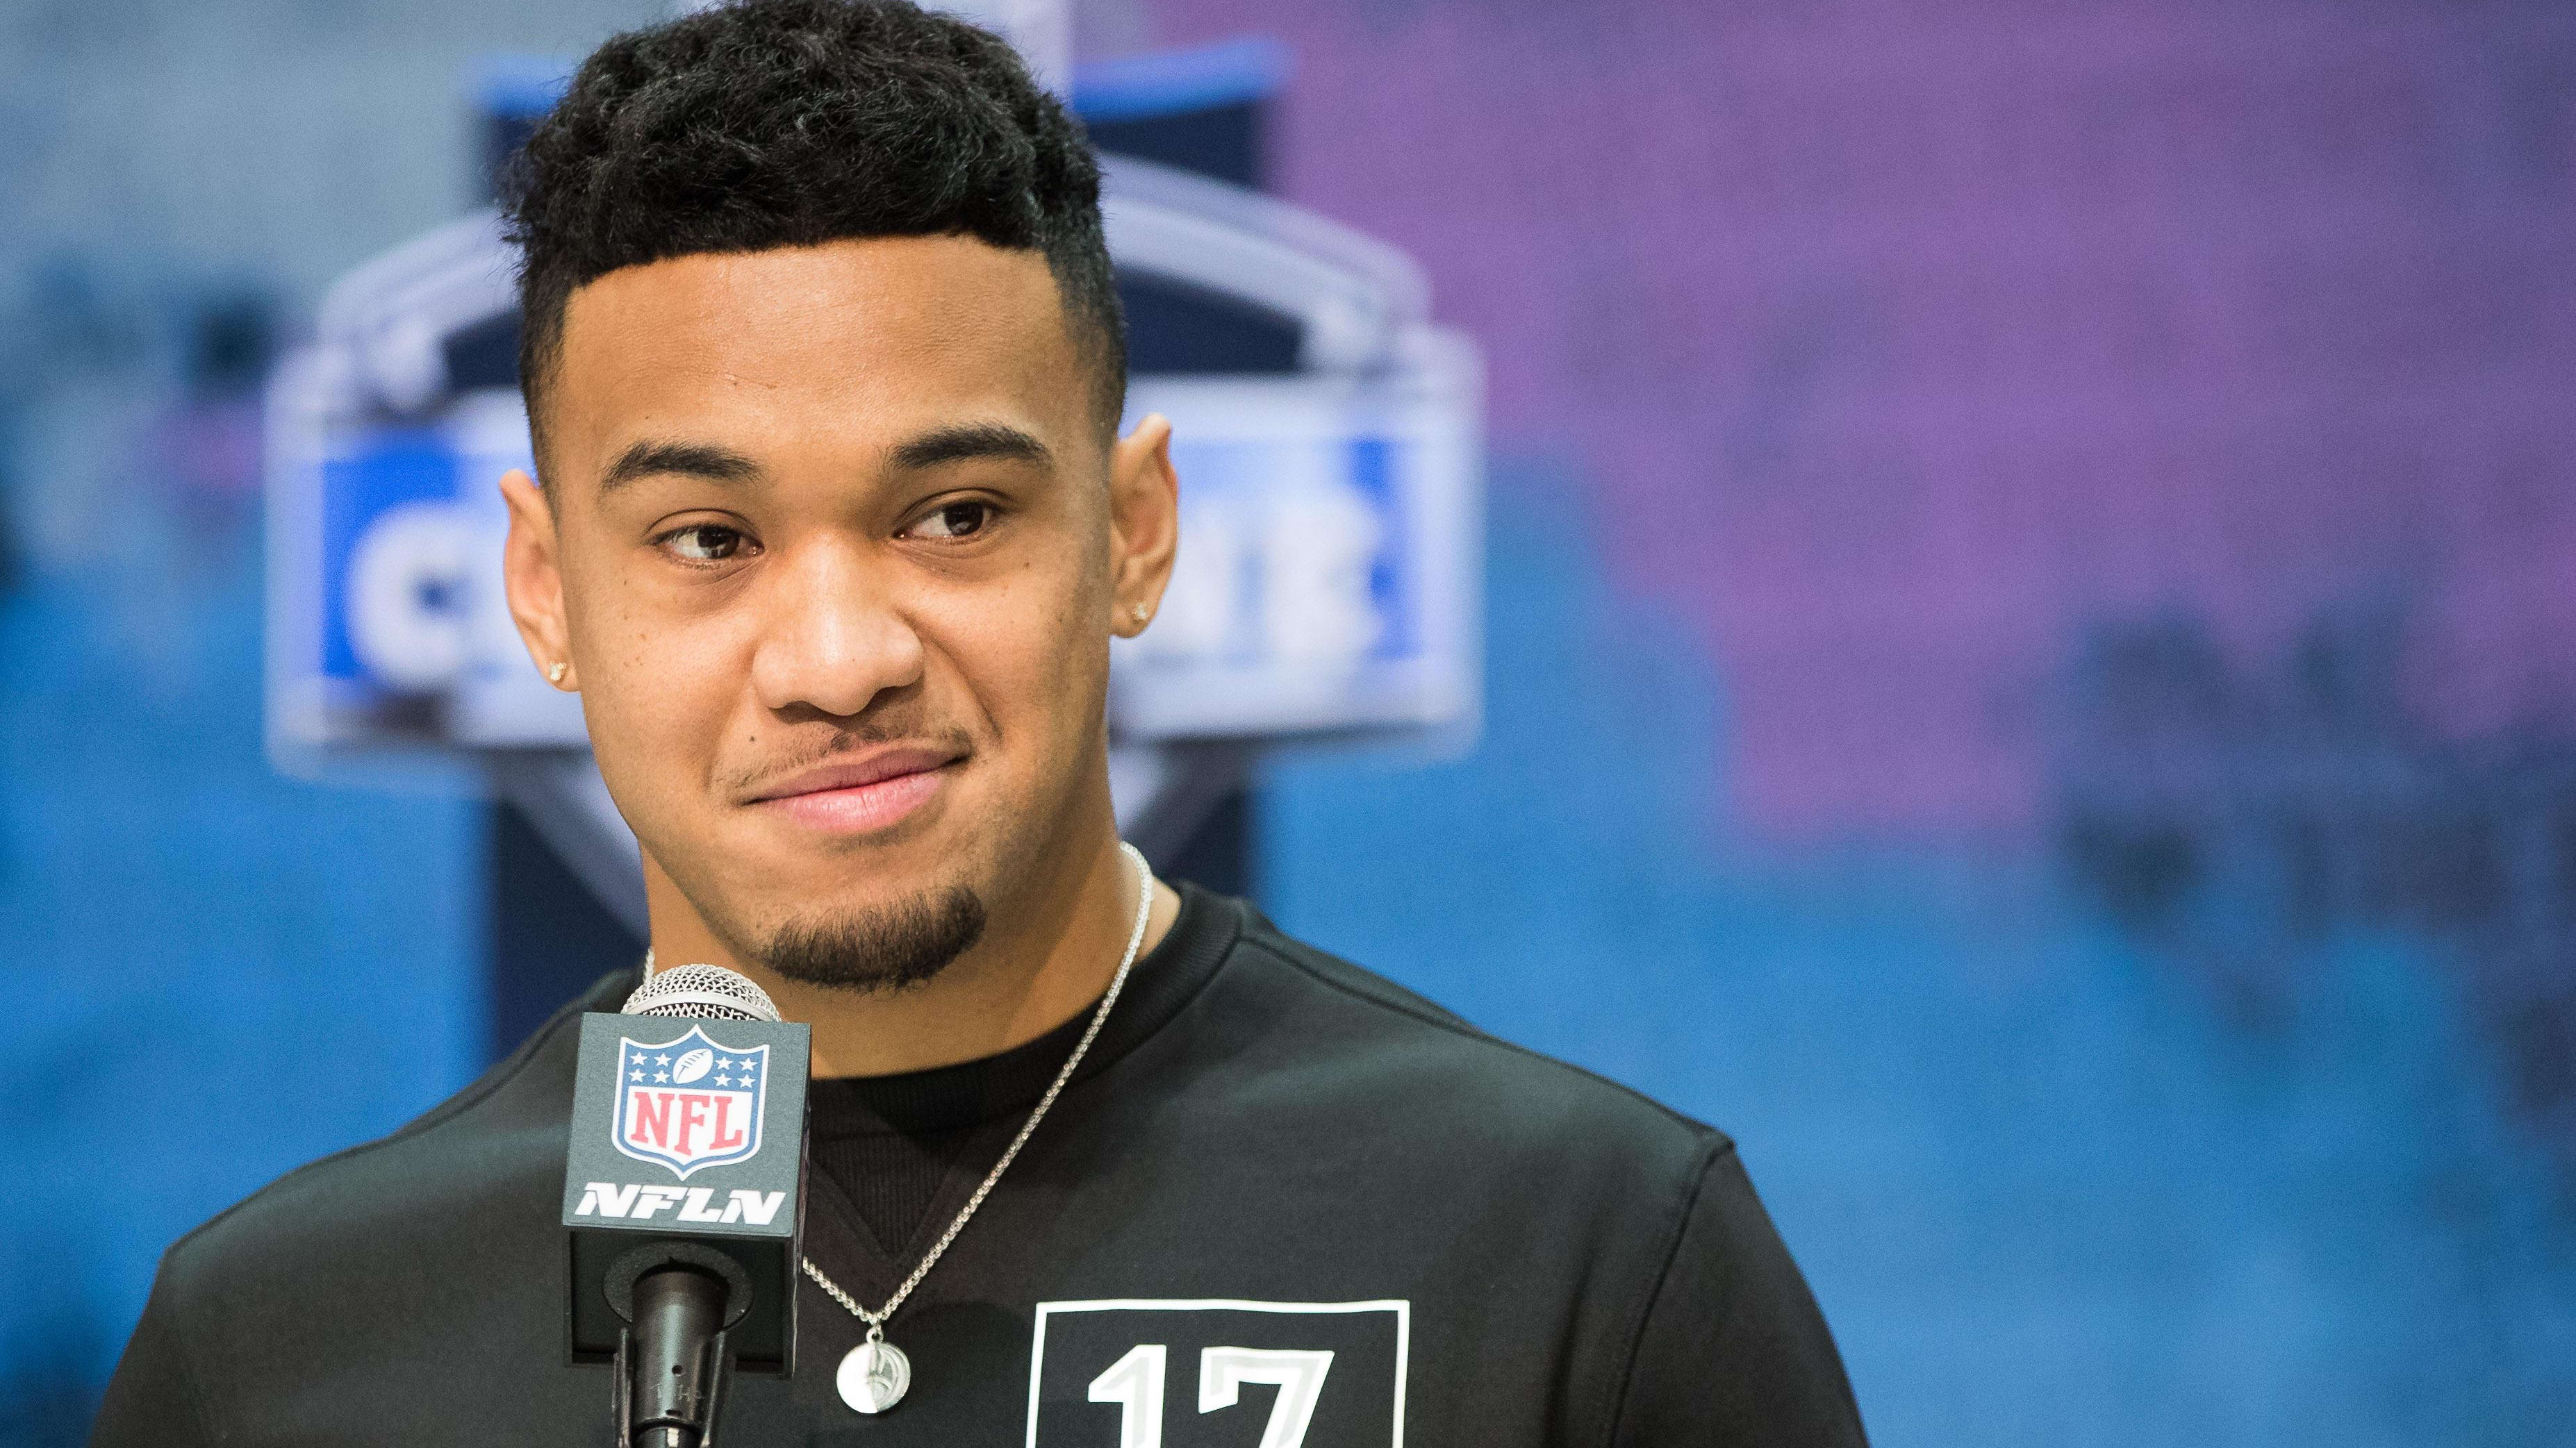 Tua Tagovailoa Overcomes Fears and Challenges in 2020 NFL Draft